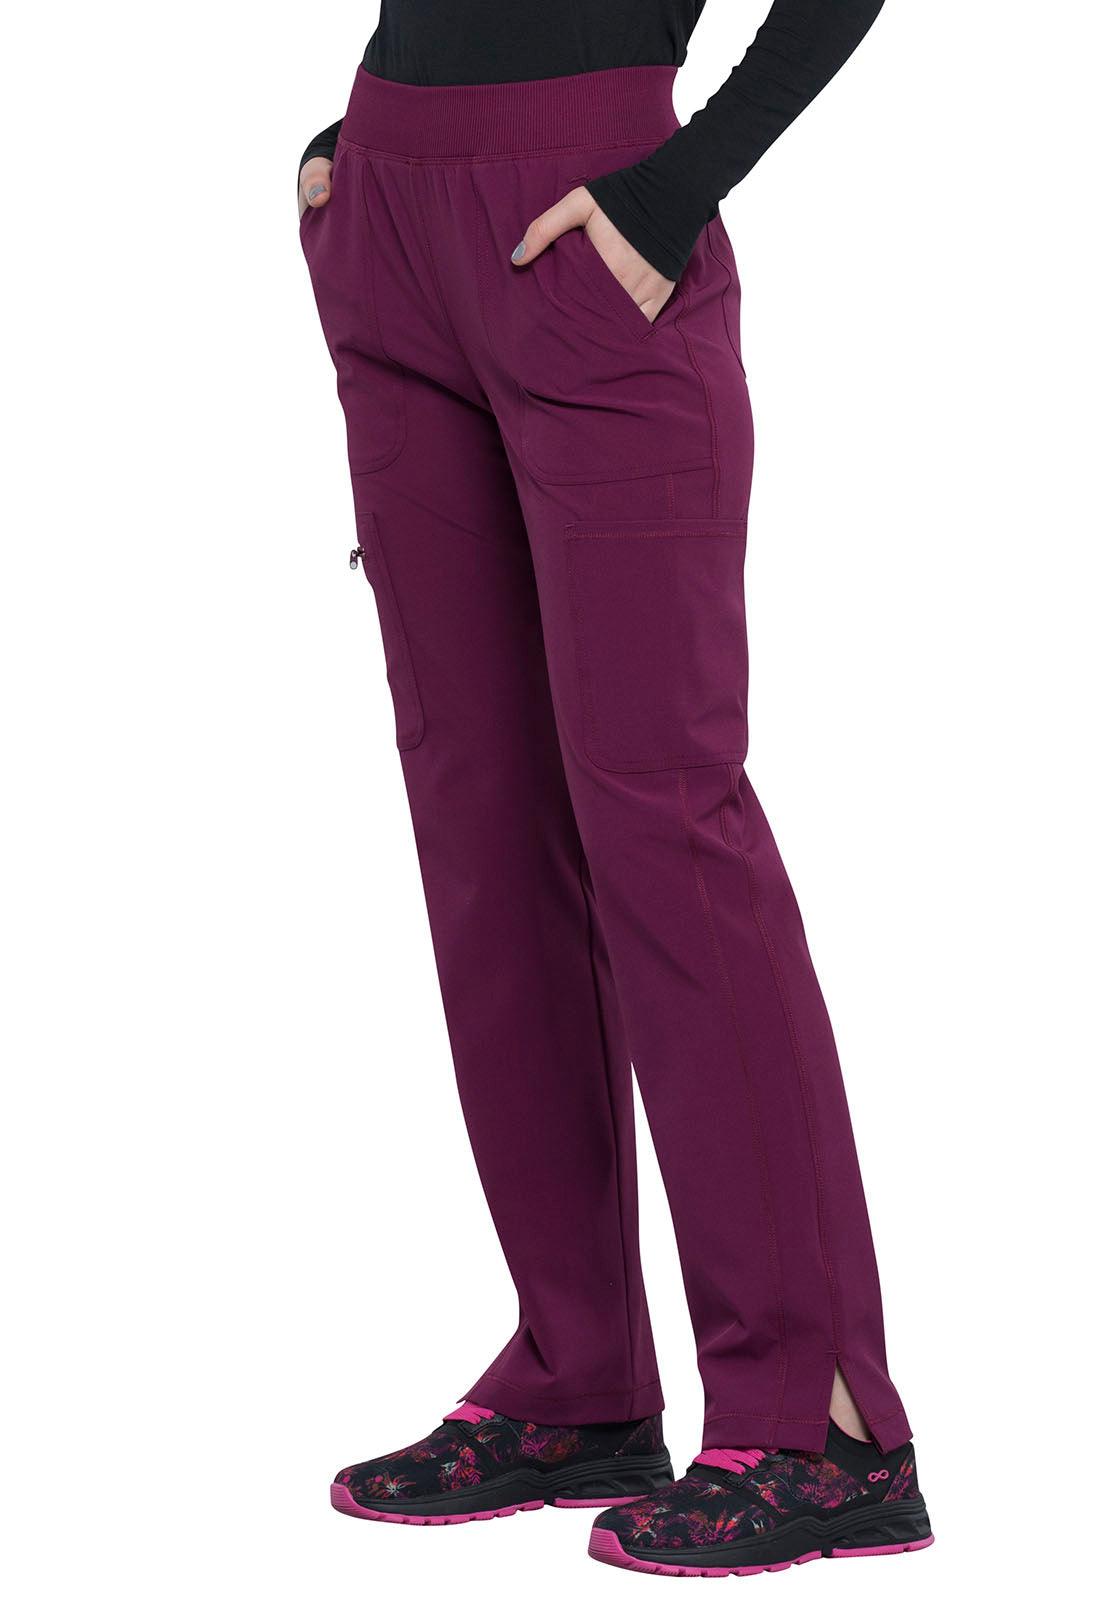 Infinity Women's Mid Rise Tapered Leg Pull-on Pant CK065AP - 21Bmedical